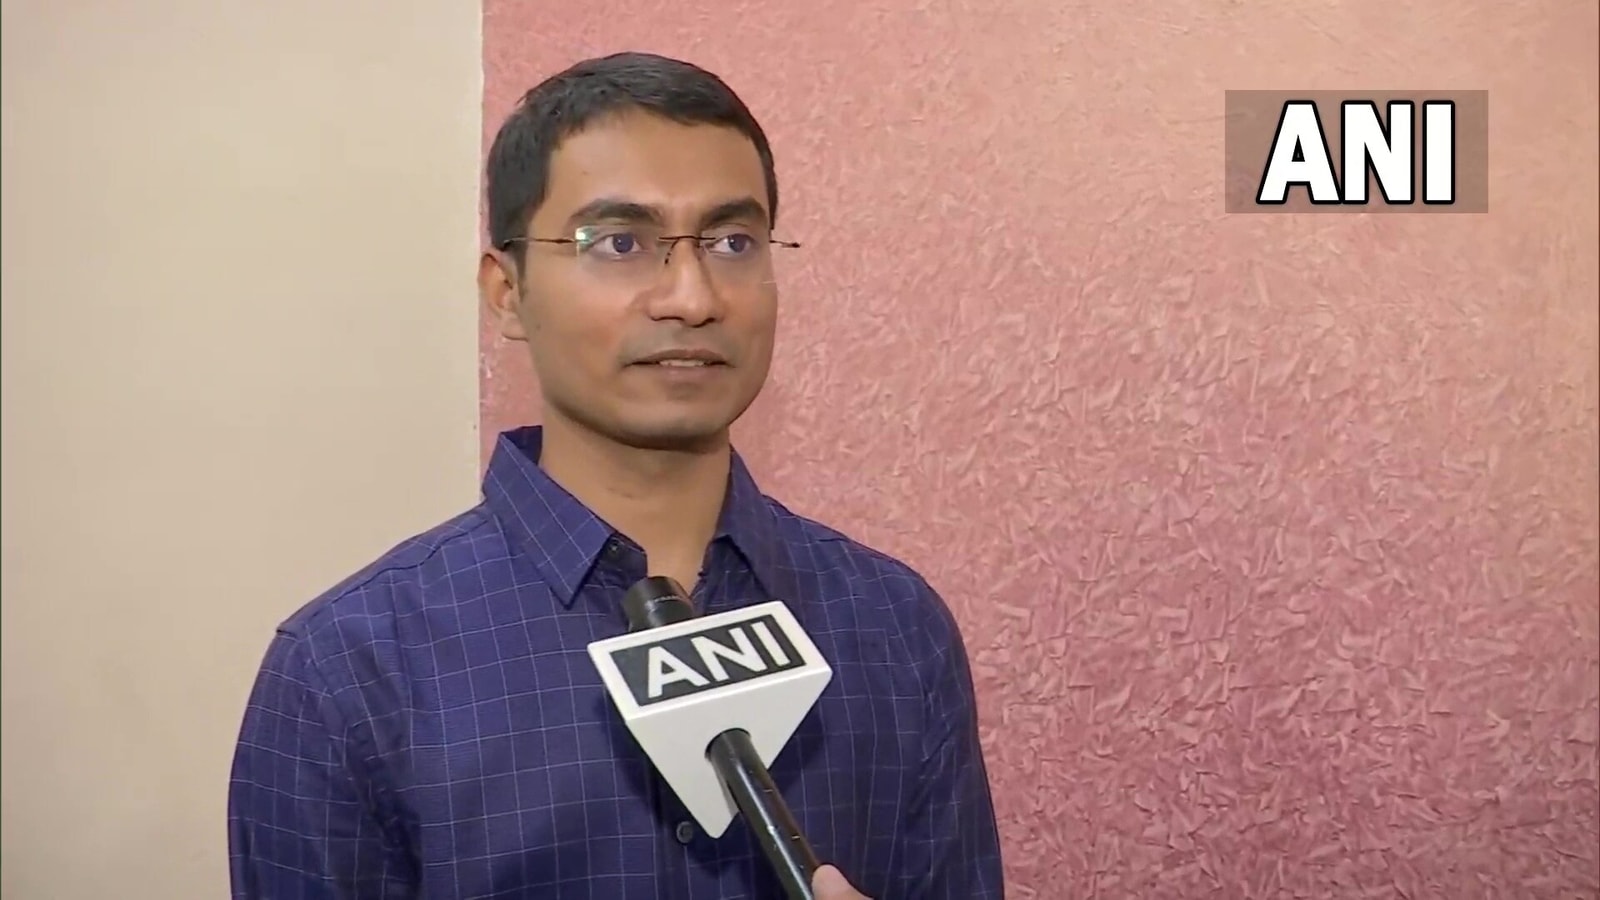 Dream to join IAS and serve underprivileged realised UPSC topper